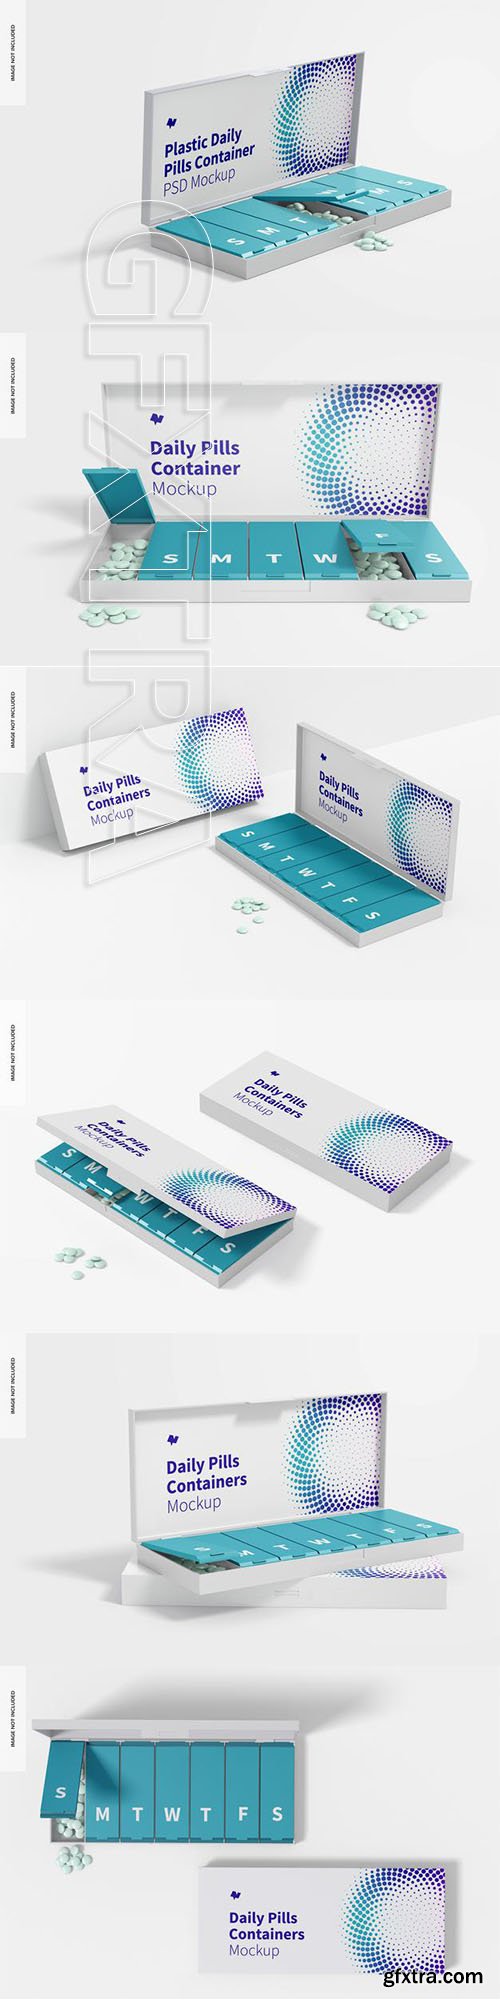 Daily pills container mockup